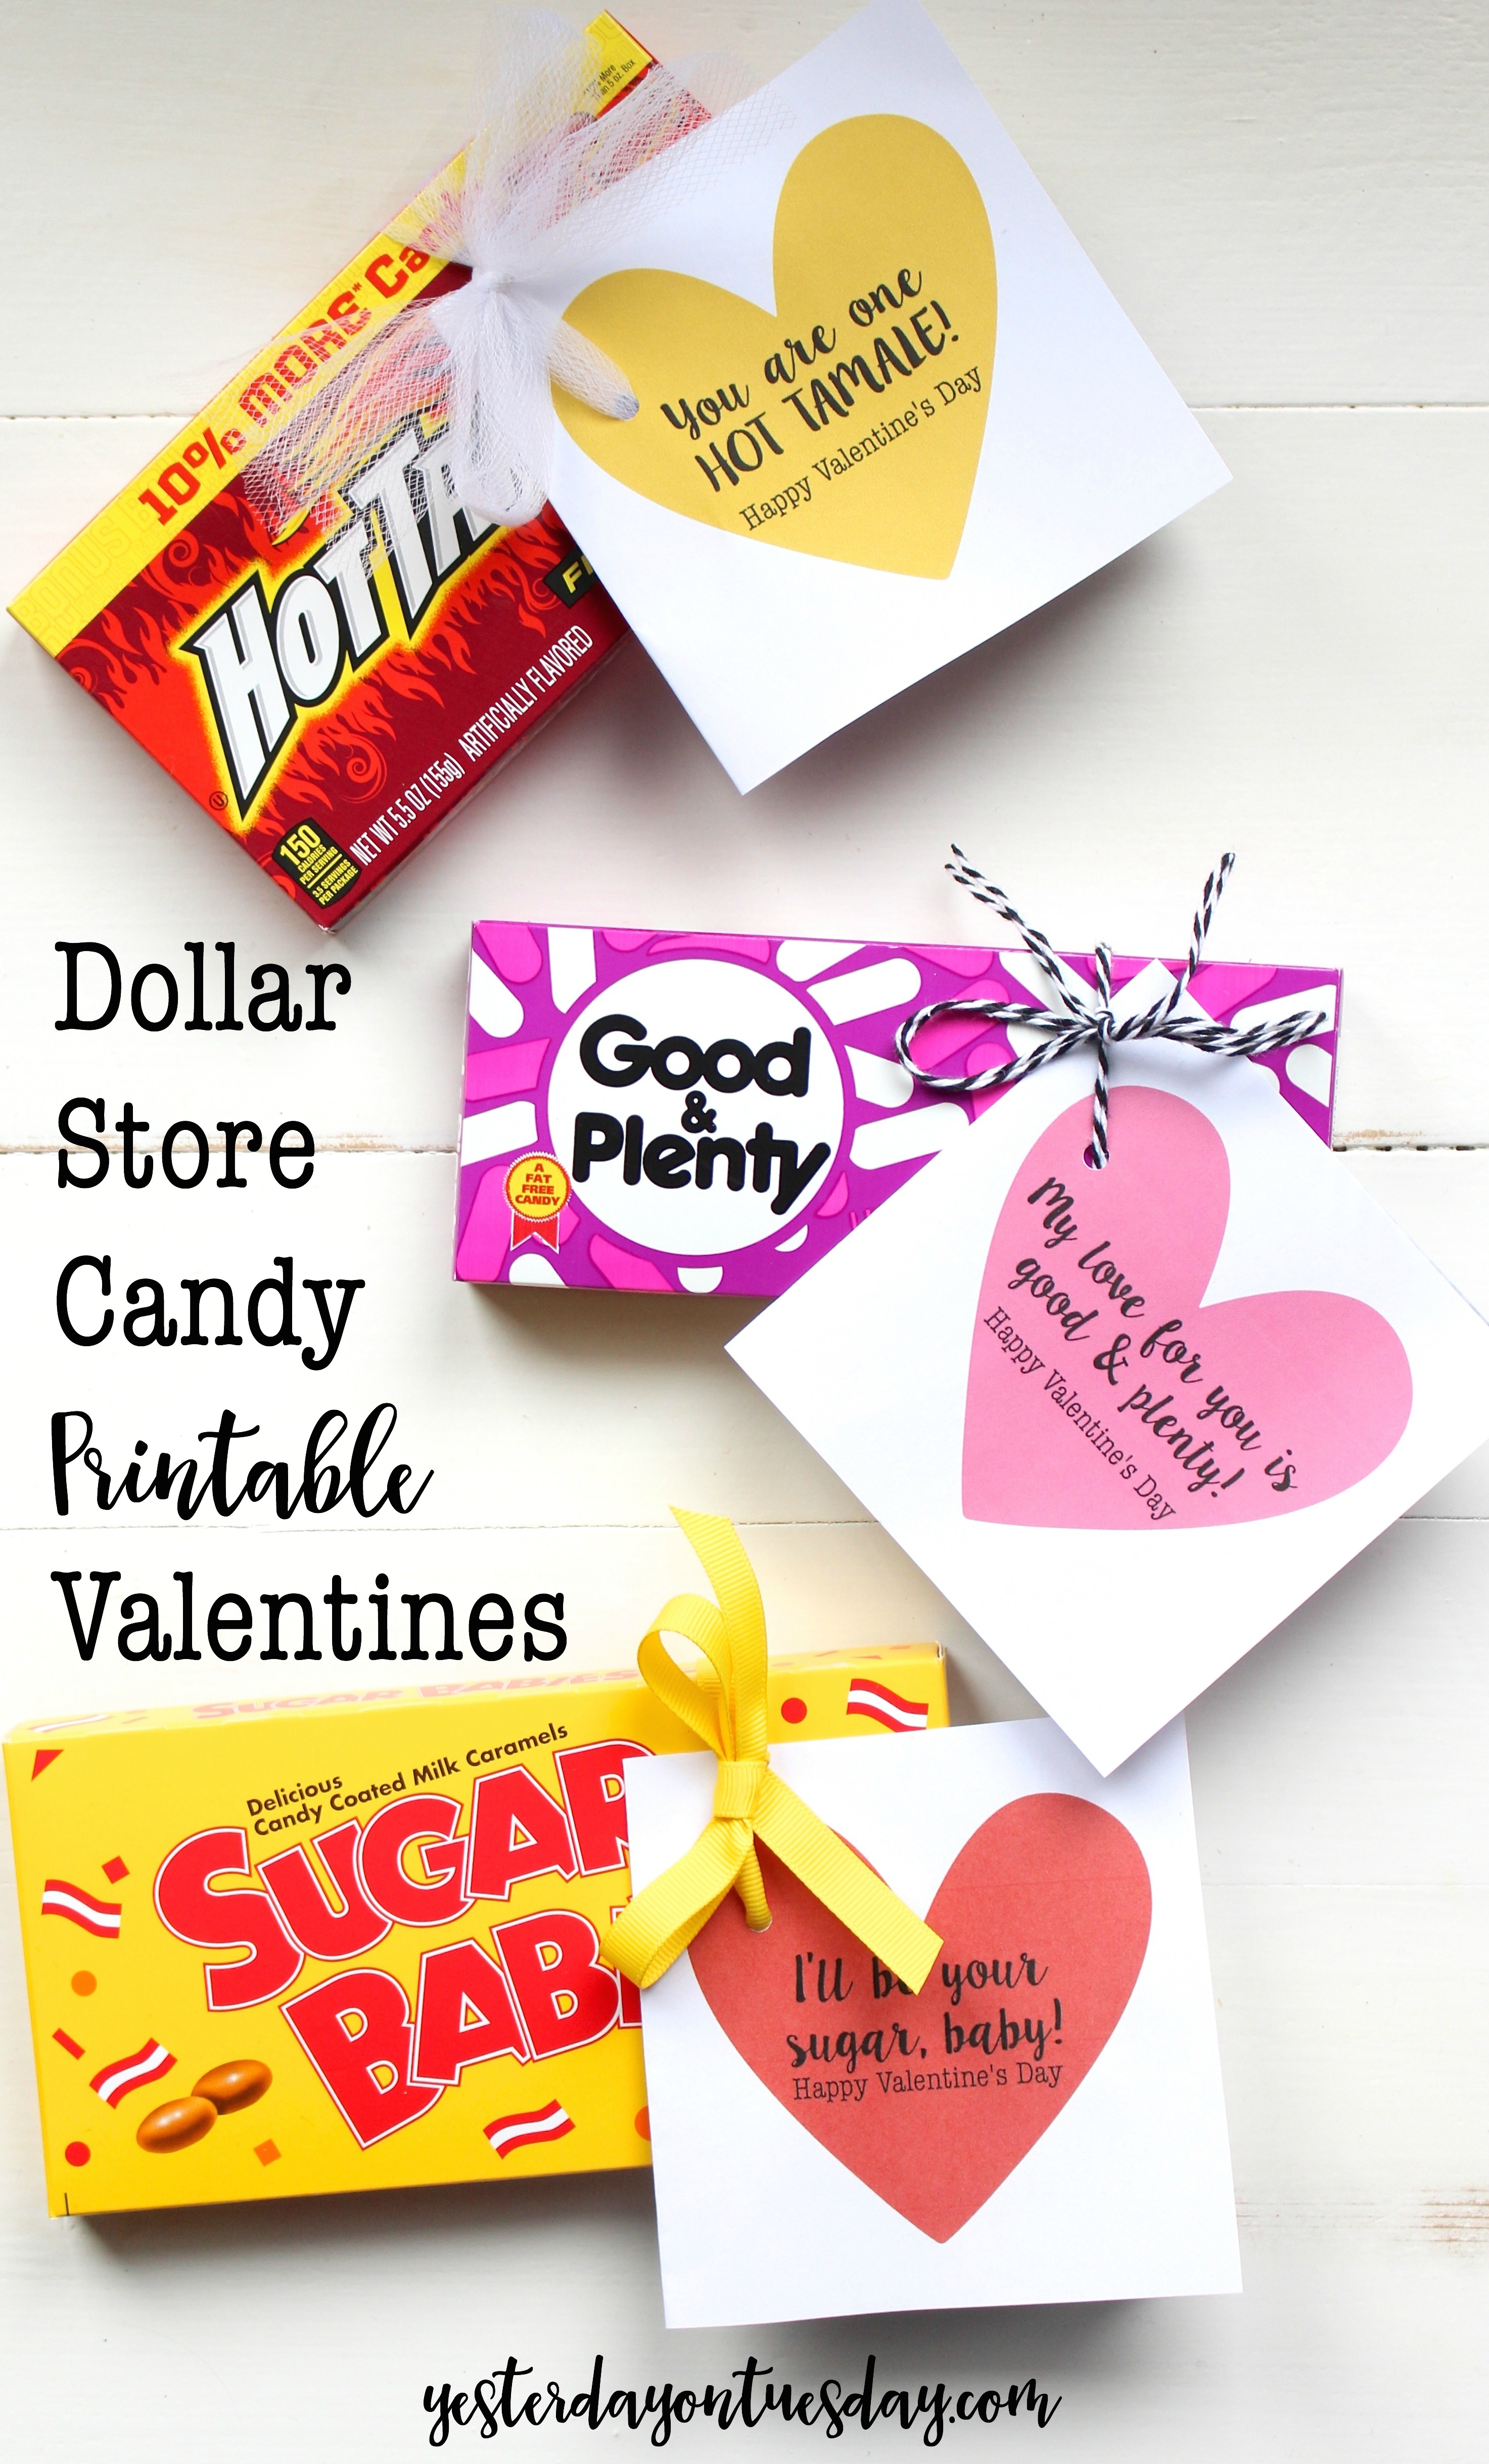 Dollar Store Candy Printable Valentines